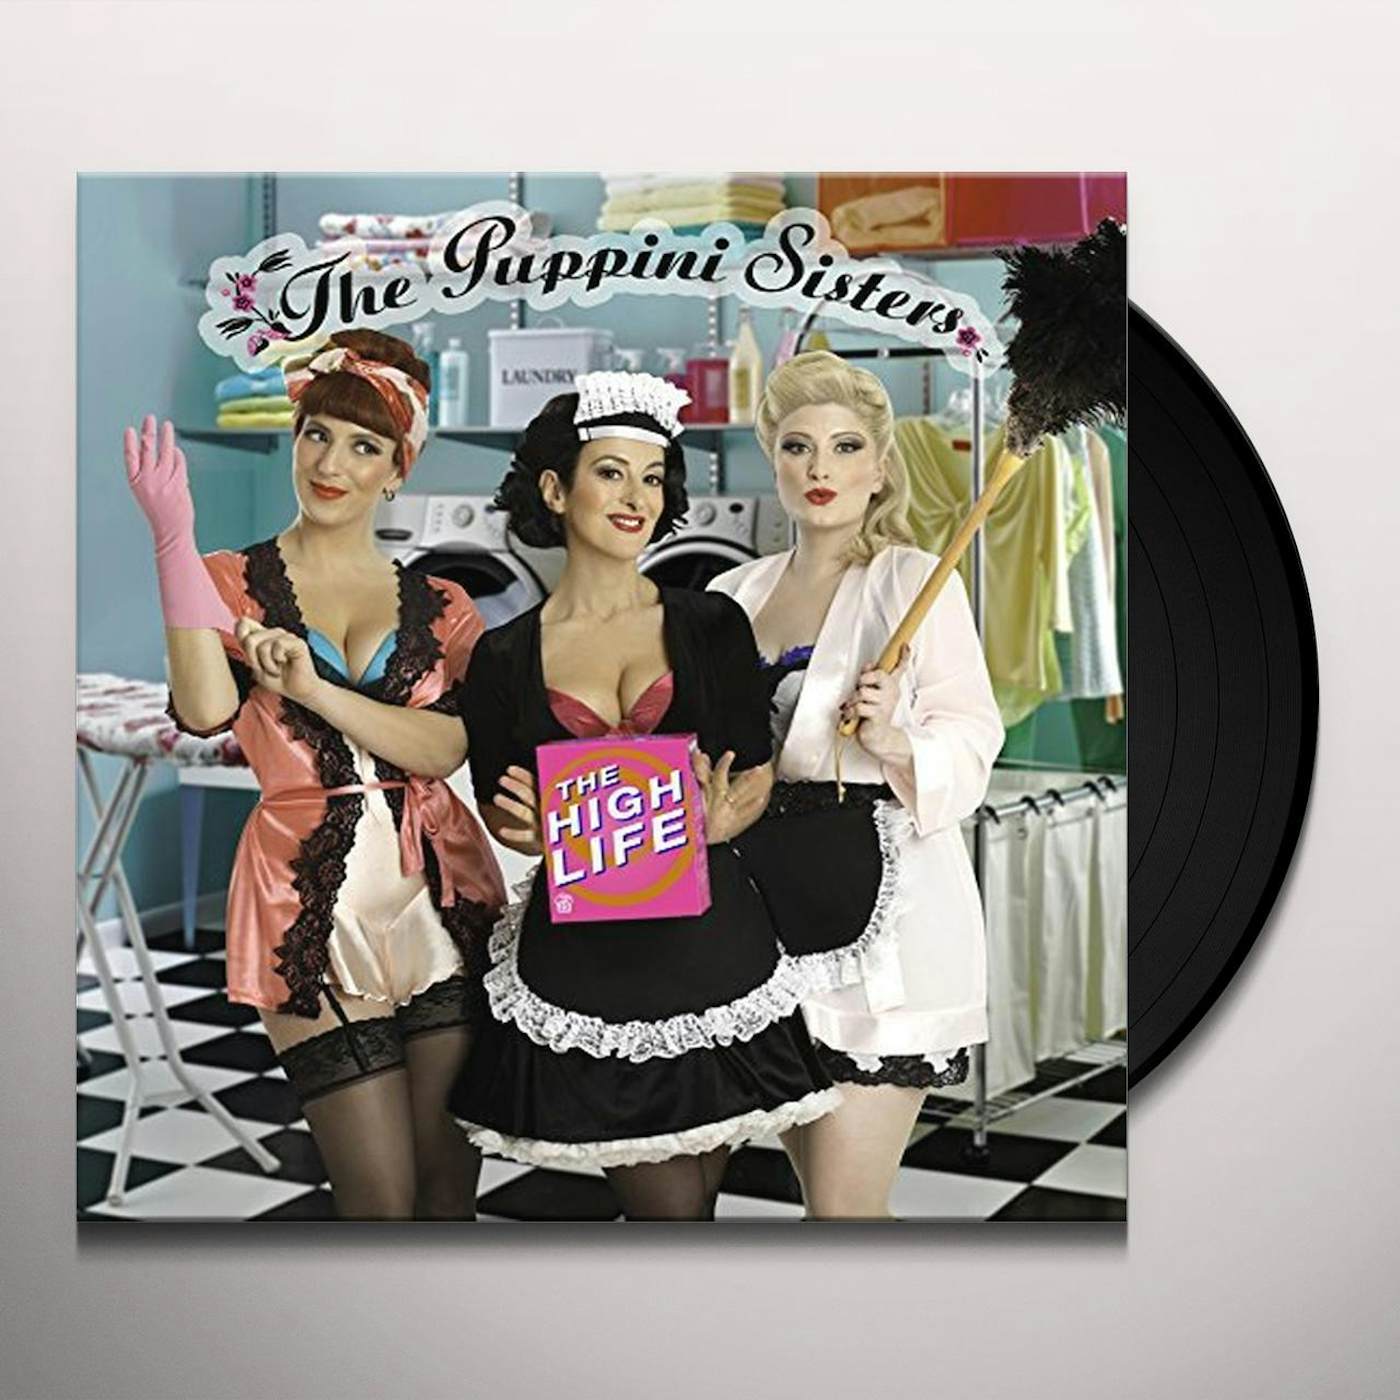 The Puppini Sisters HIGH LIFE Vinyl Record